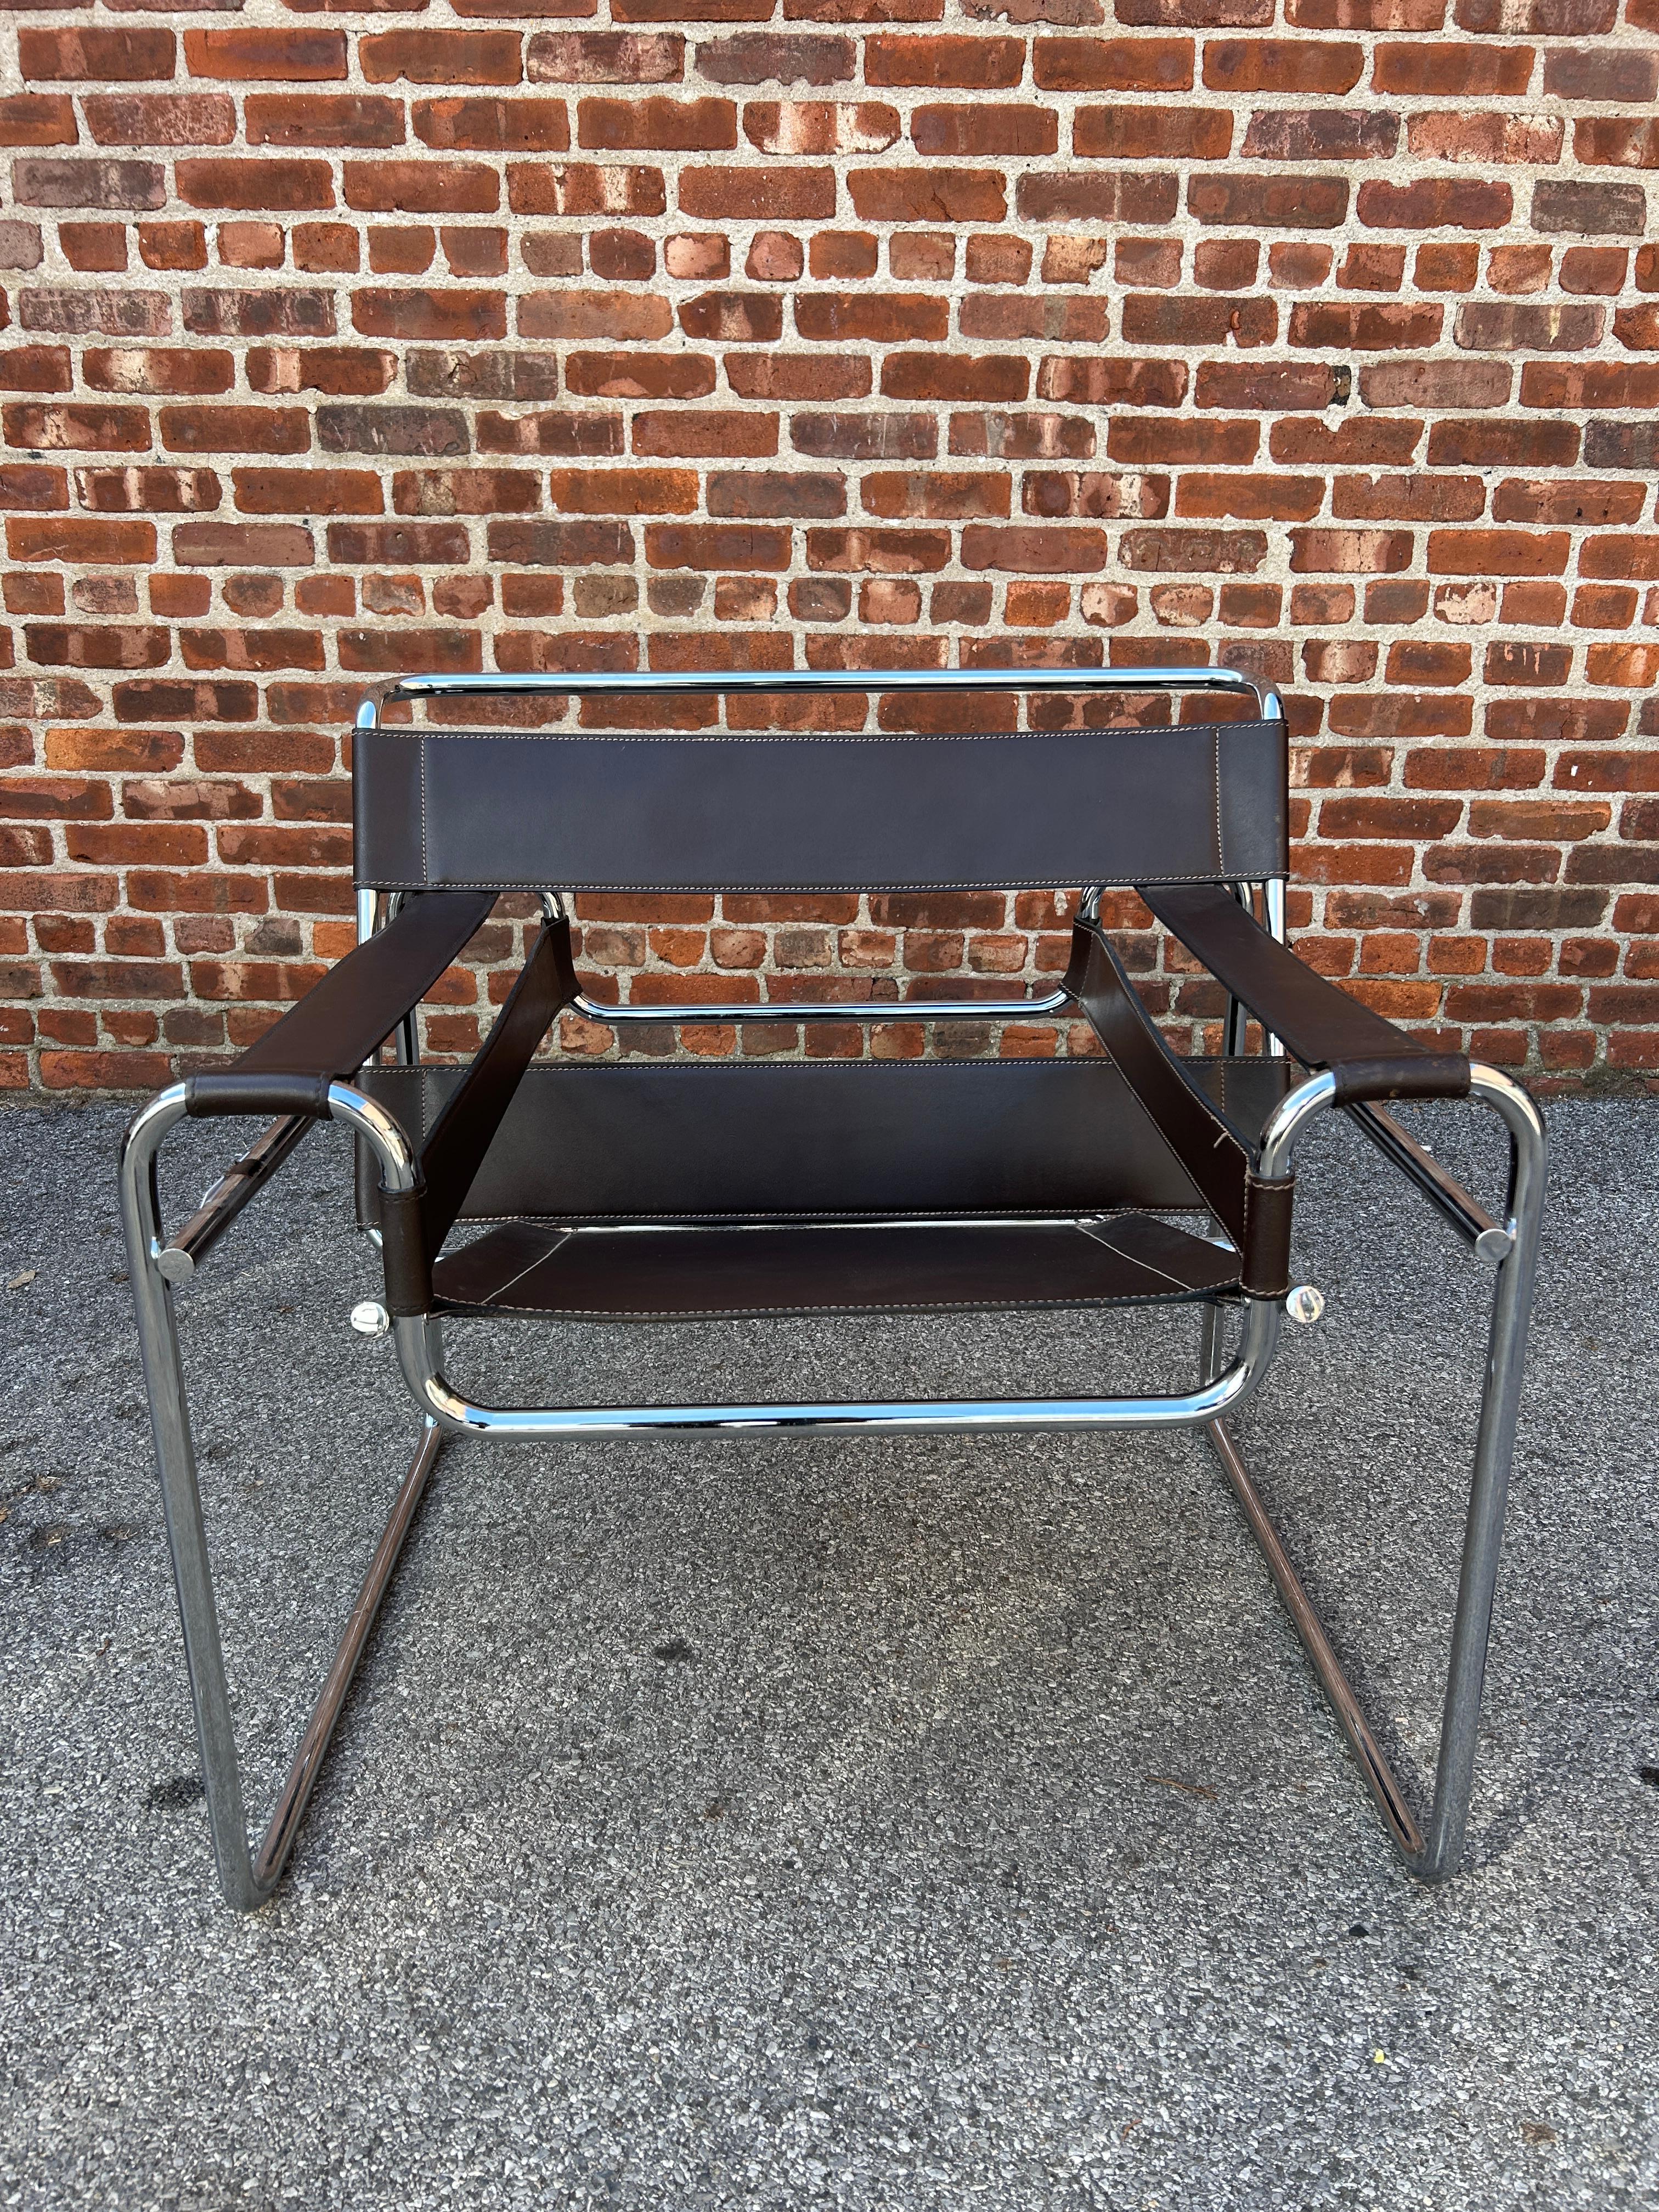 Wassily lounge chair designed by Marcel Breuer in brown full leather. This vintage chair has the traits for authenticity verification such as flat caps on the end tubes, black hex screws and brown leather with stitching. 

Listing is for (1) chair